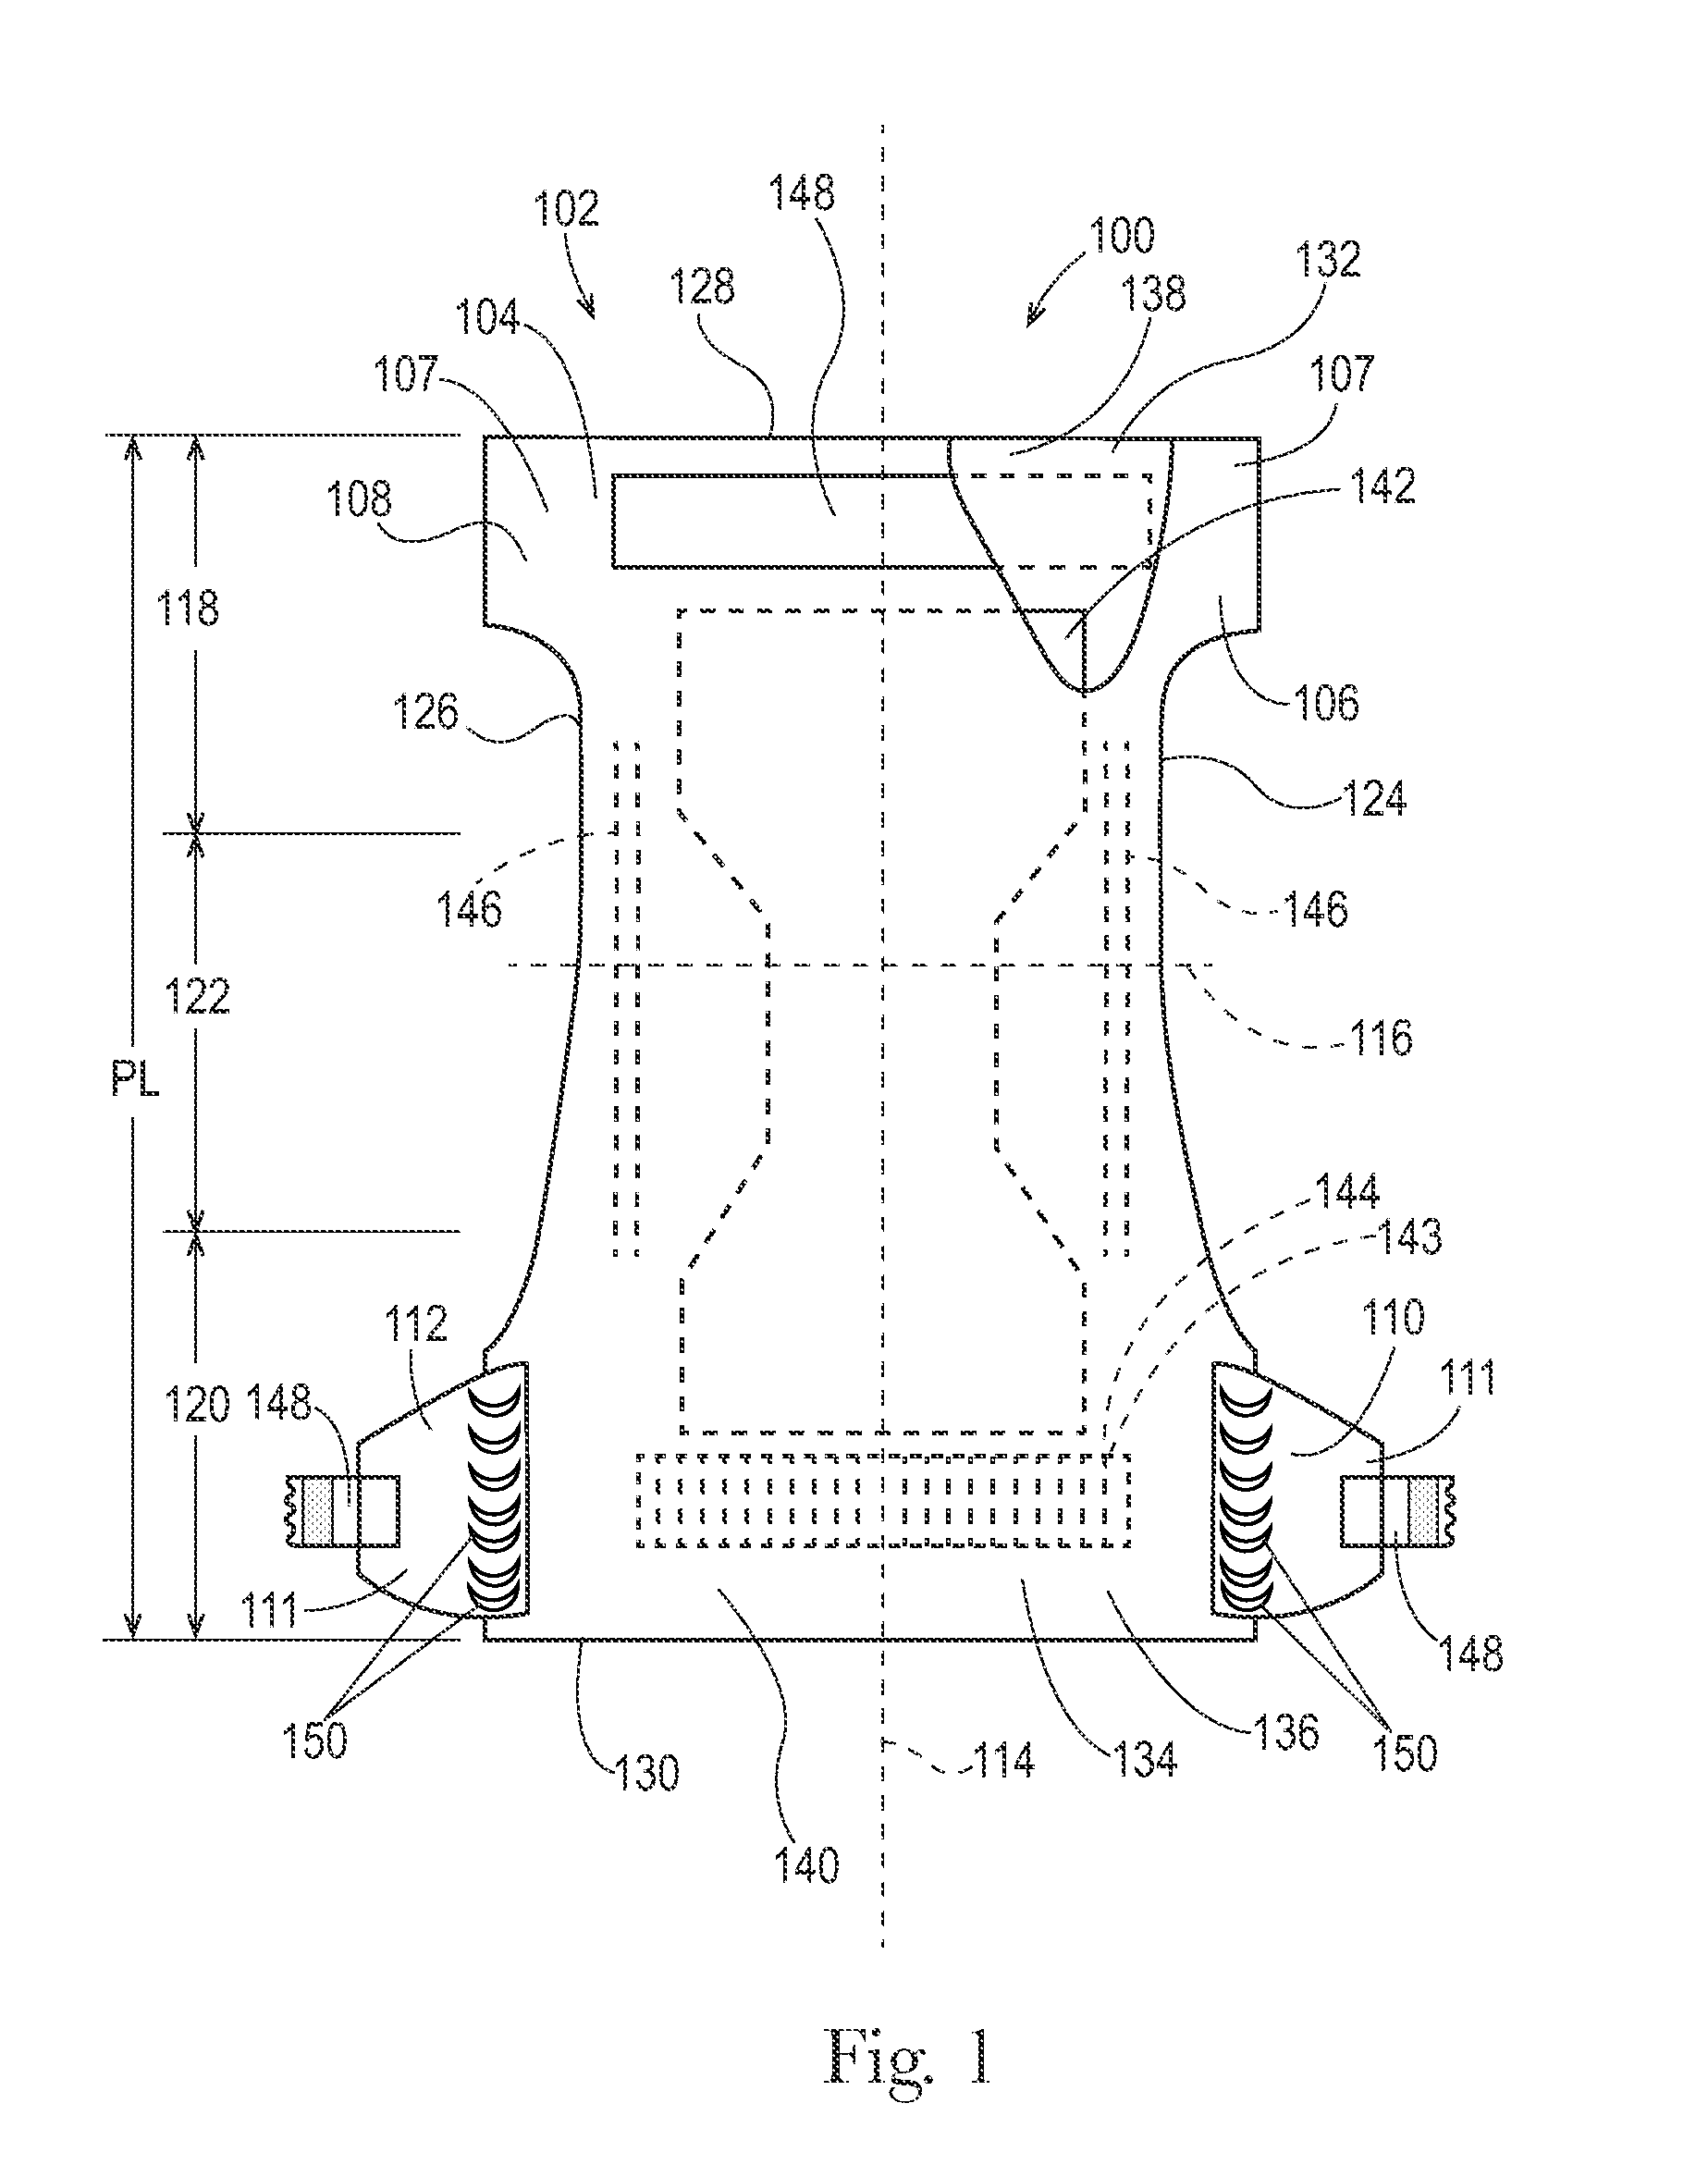 Systems and Methods for Adjusting Target Manufacturing Parameters on an Absorbent Product Converting Line